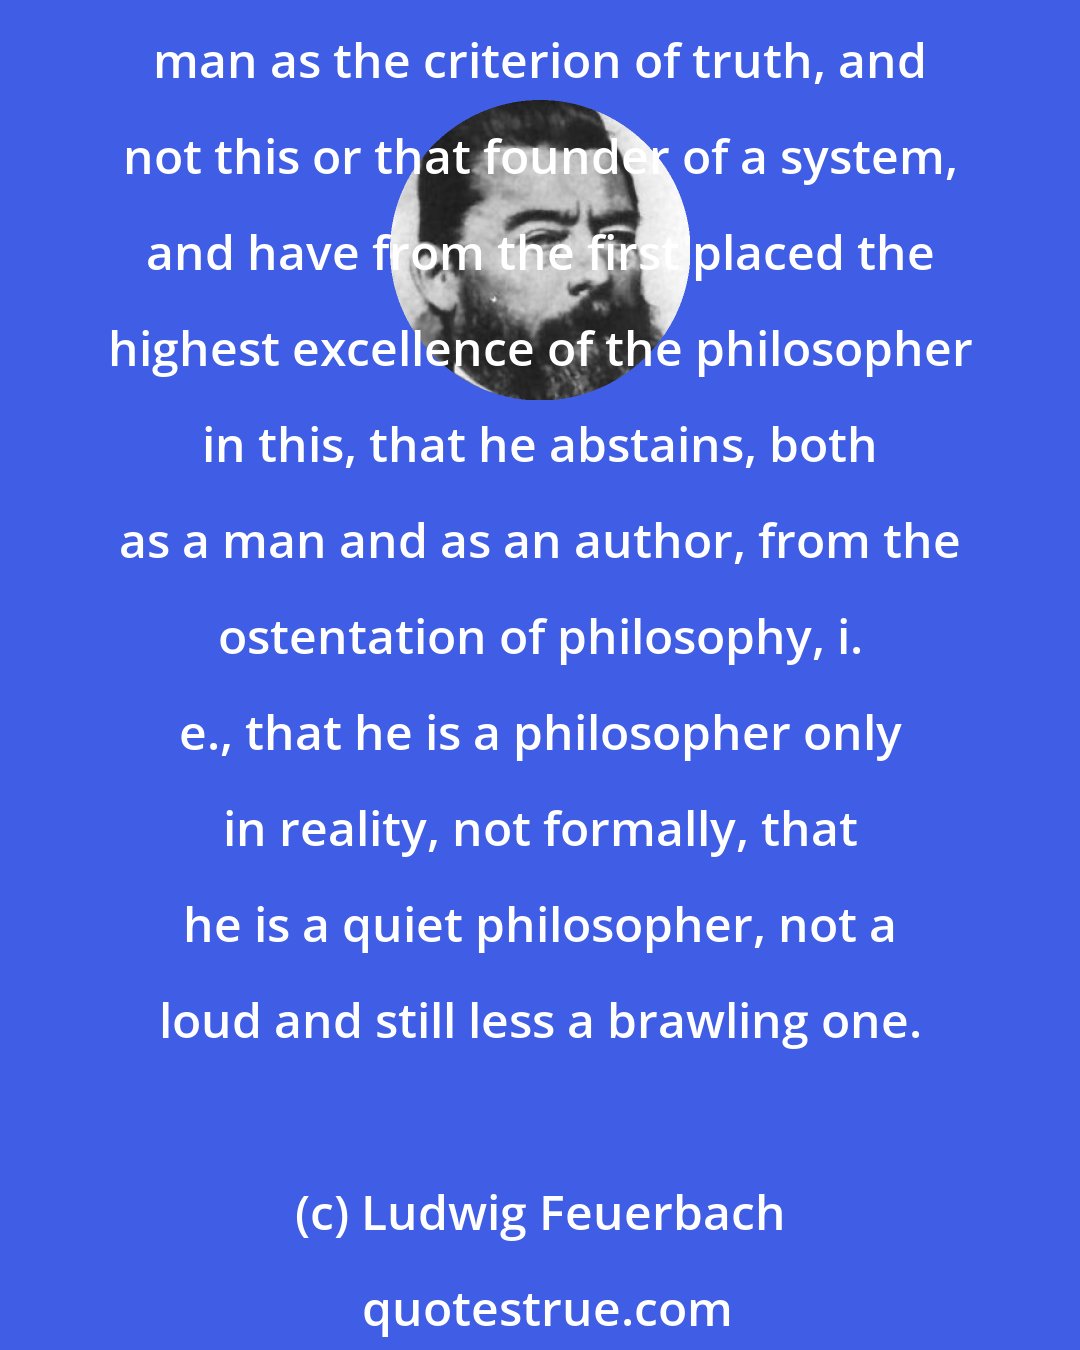 Ludwig Feuerbach: I have always taken as the standard of the mode of teaching and writing, not the abstract, particular, professional philosopher, but universal man, that I have regarded man as the criterion of truth, and not this or that founder of a system, and have from the first placed the highest excellence of the philosopher in this, that he abstains, both as a man and as an author, from the ostentation of philosophy, i. e., that he is a philosopher only in reality, not formally, that he is a quiet philosopher, not a loud and still less a brawling one.